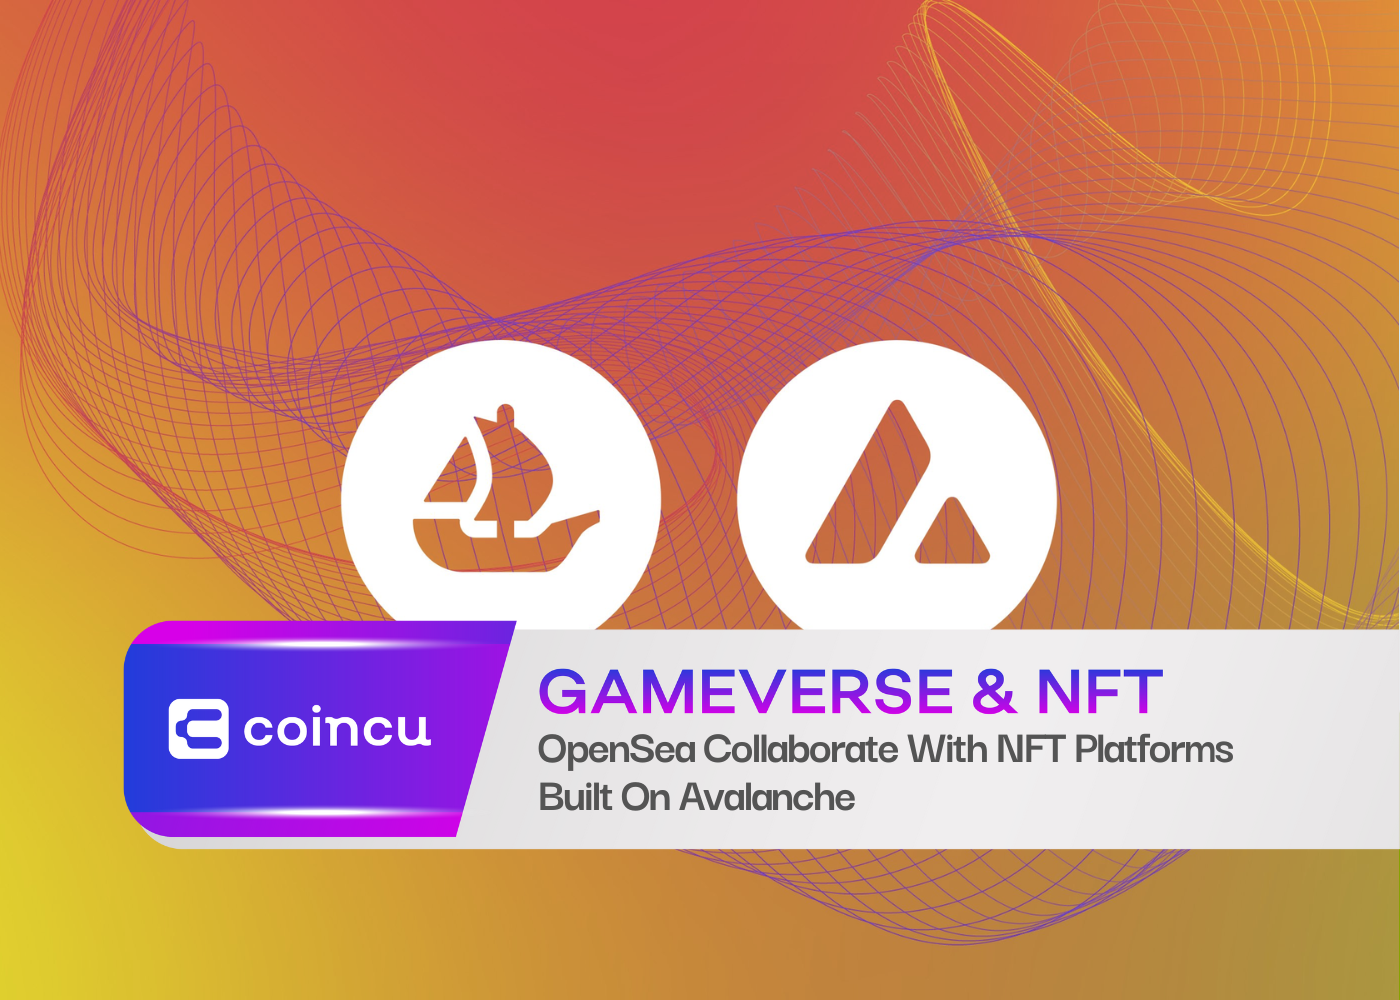 OpenSea Collaborate With NFT Platforms Built On Avalanche